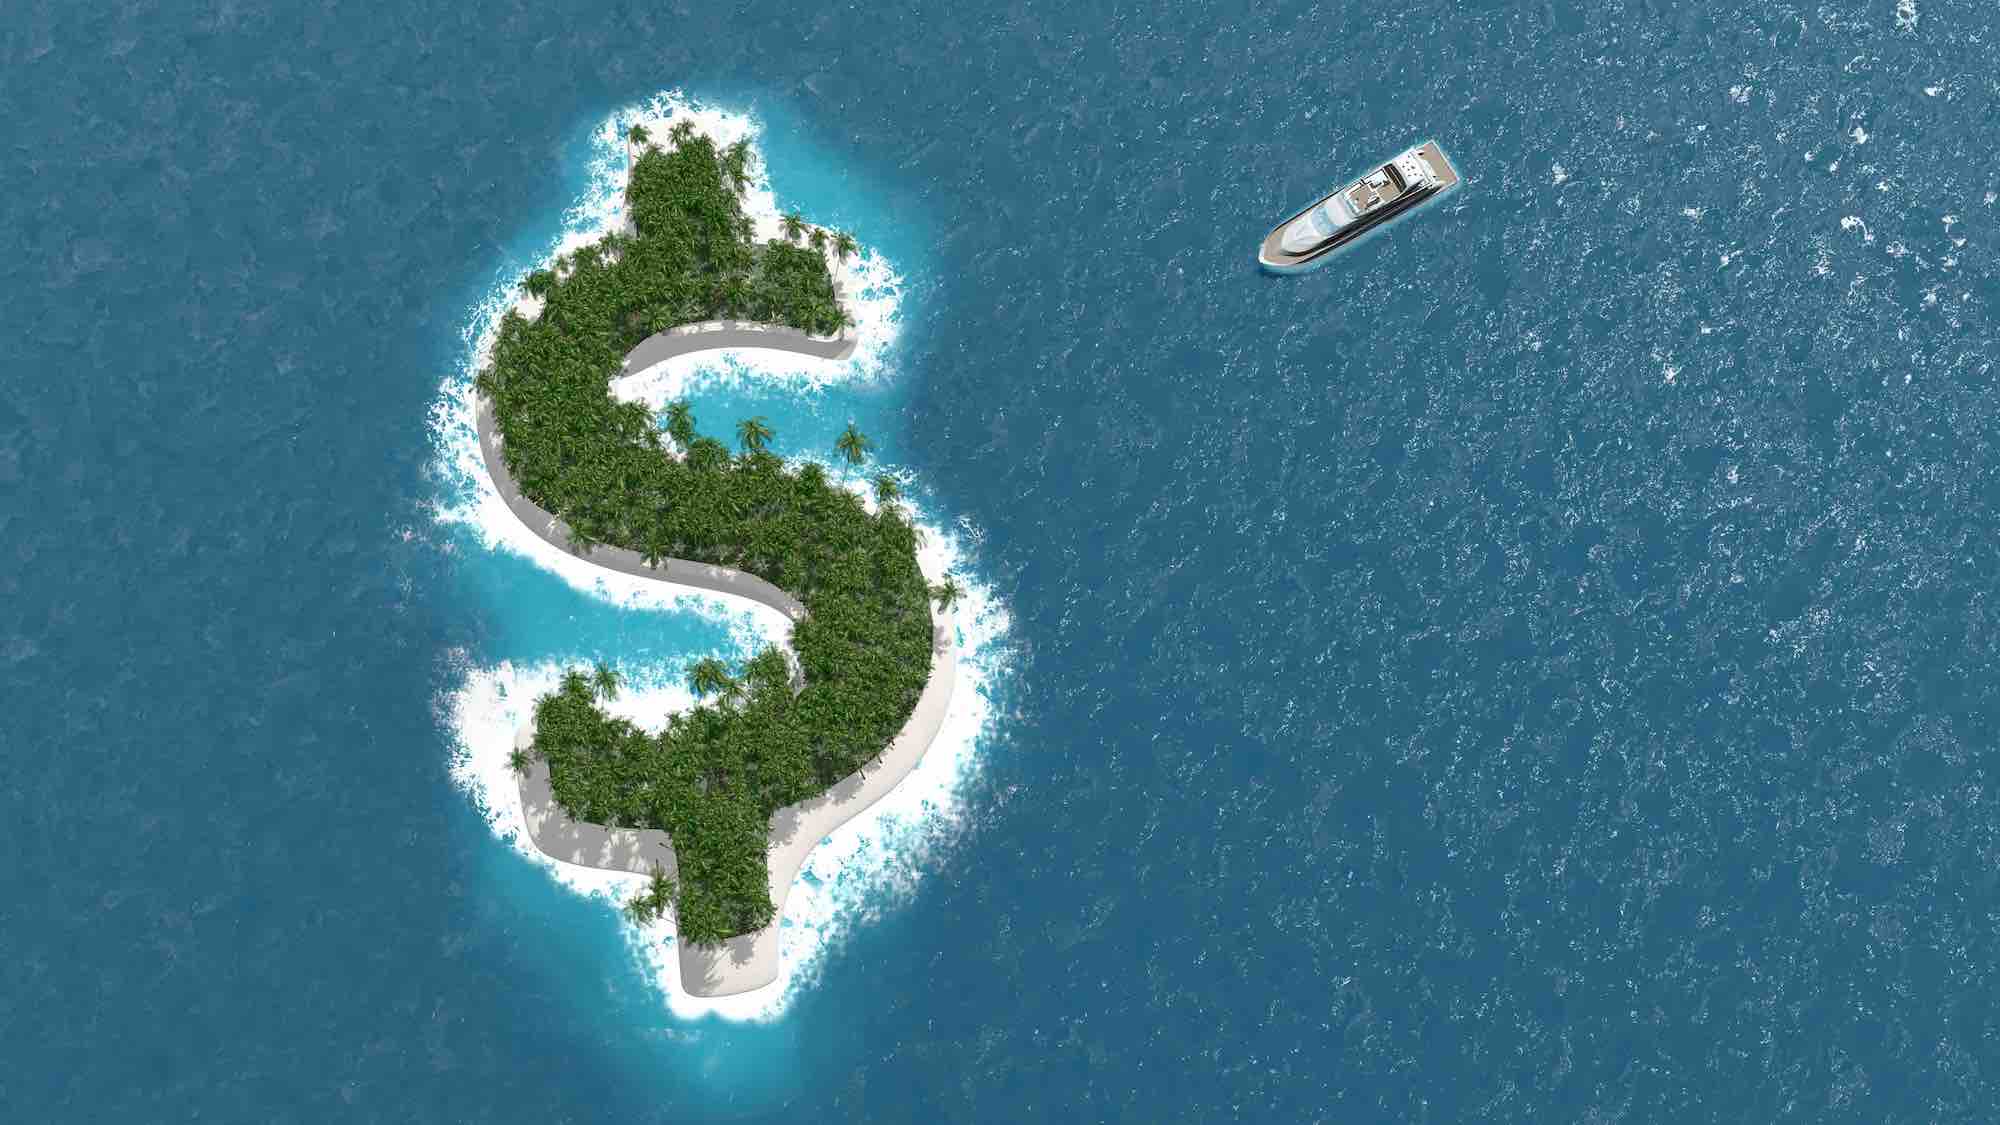 Tax haven, financial or wealth evasion on a dollar shaped island. A luxury boat is sailing to the island.